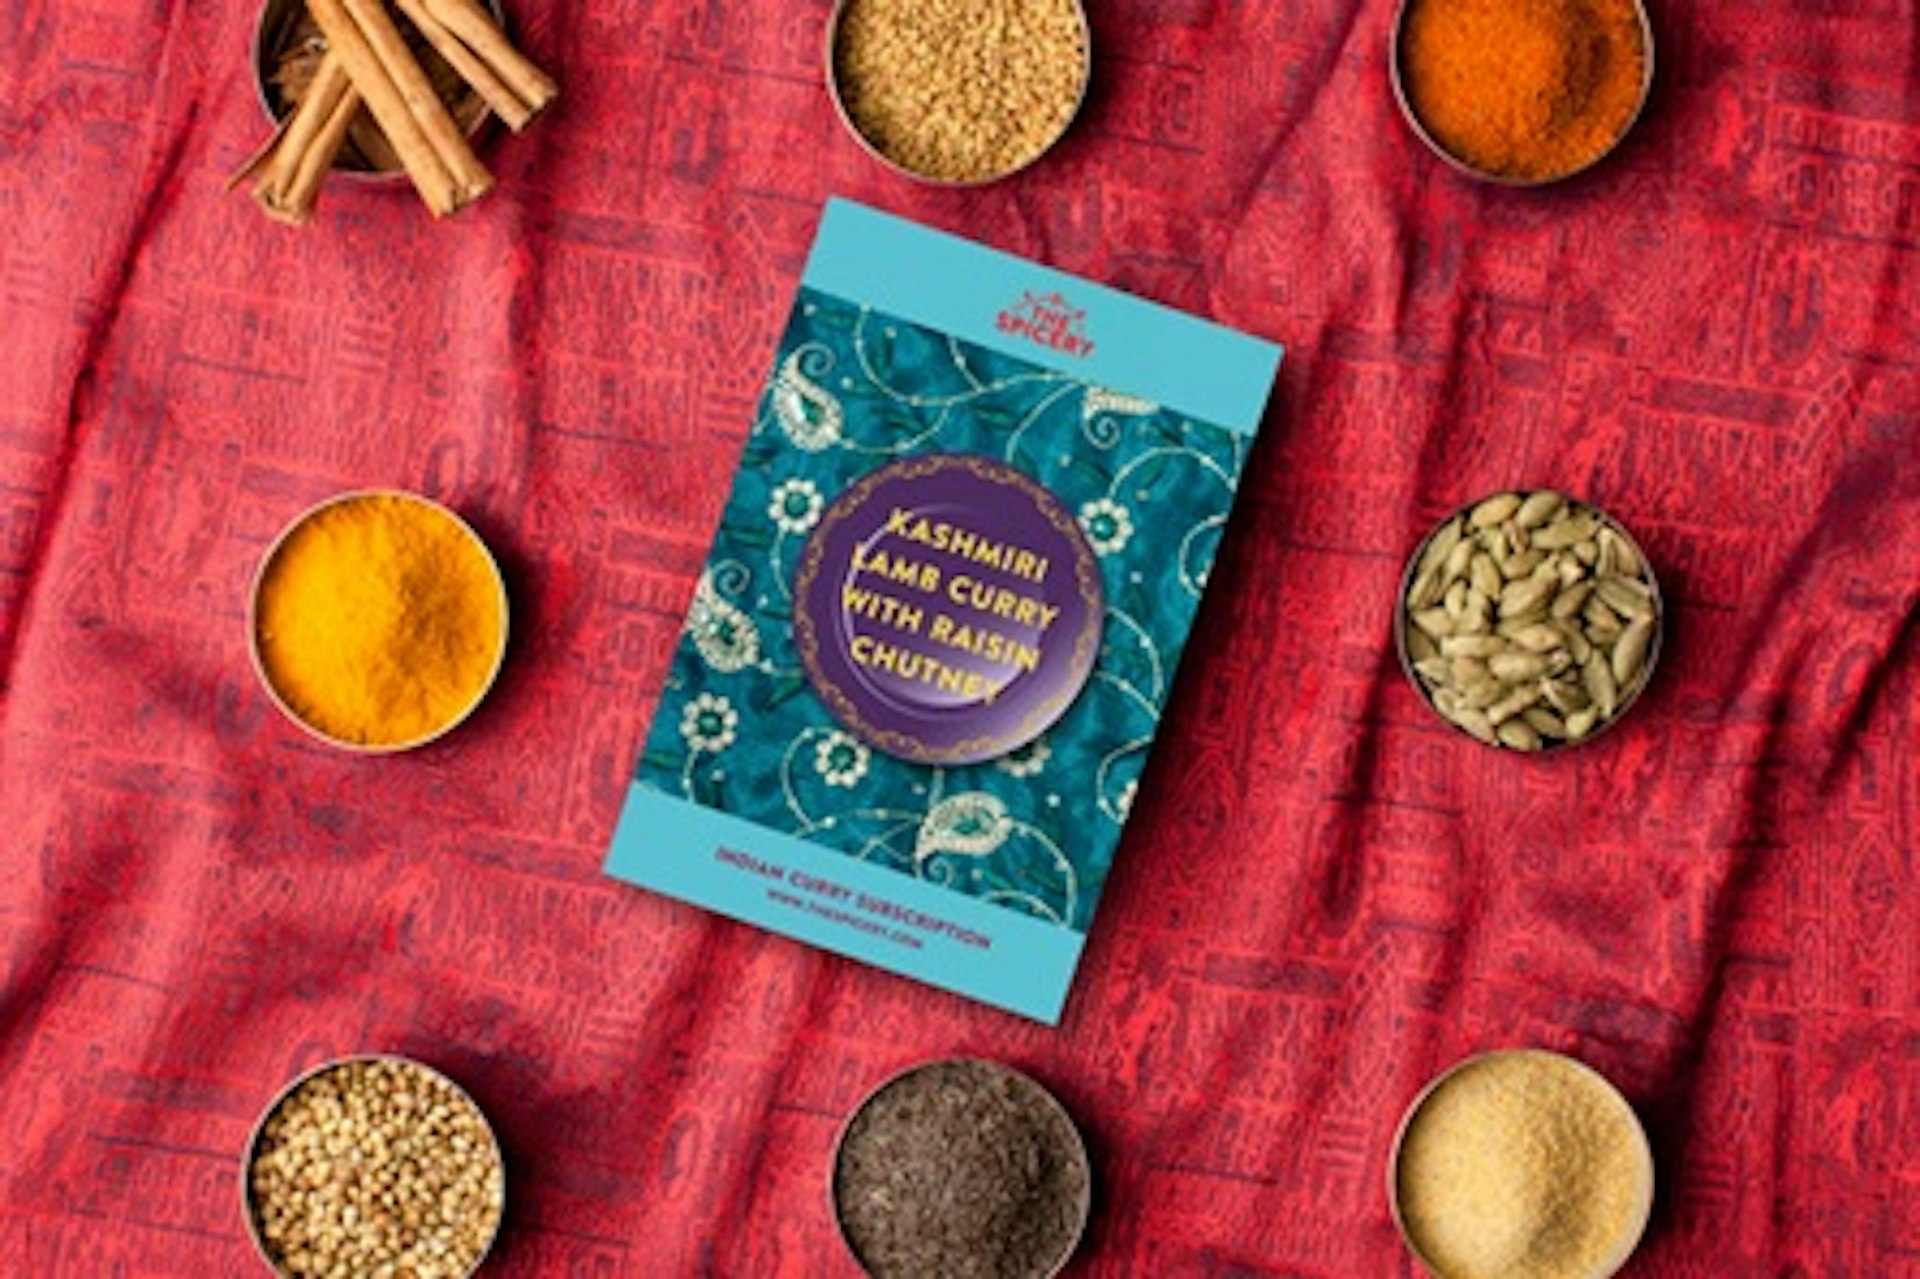 Indian Curry Club Recipe Kit Subscription - Six Months 1